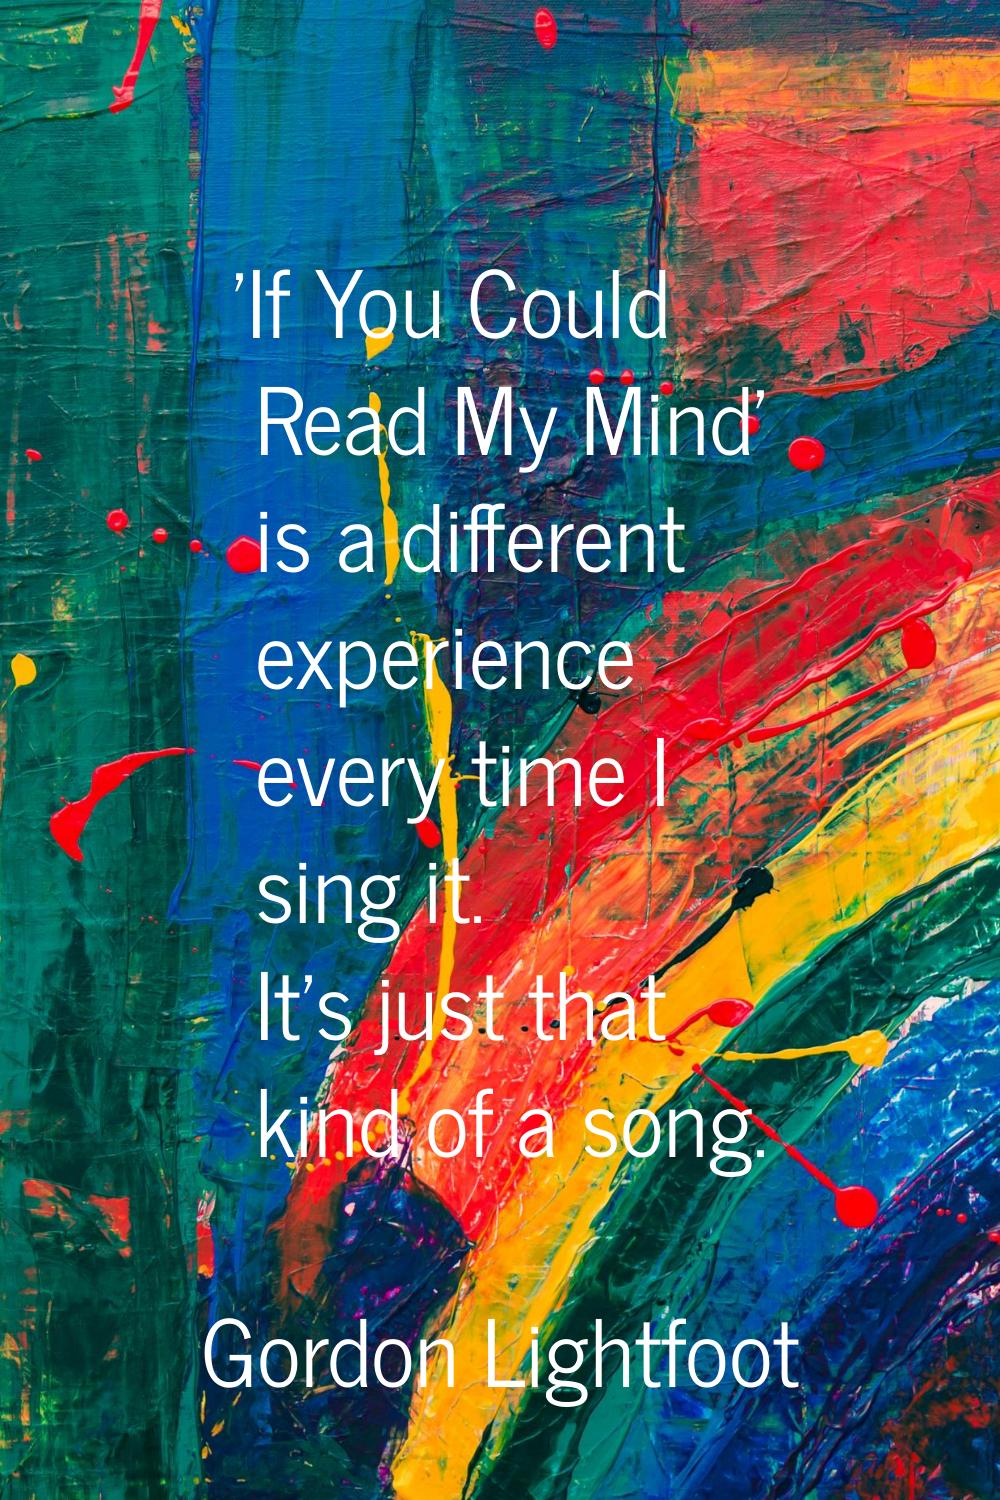 'If You Could Read My Mind' is a different experience every time I sing it. It's just that kind of 